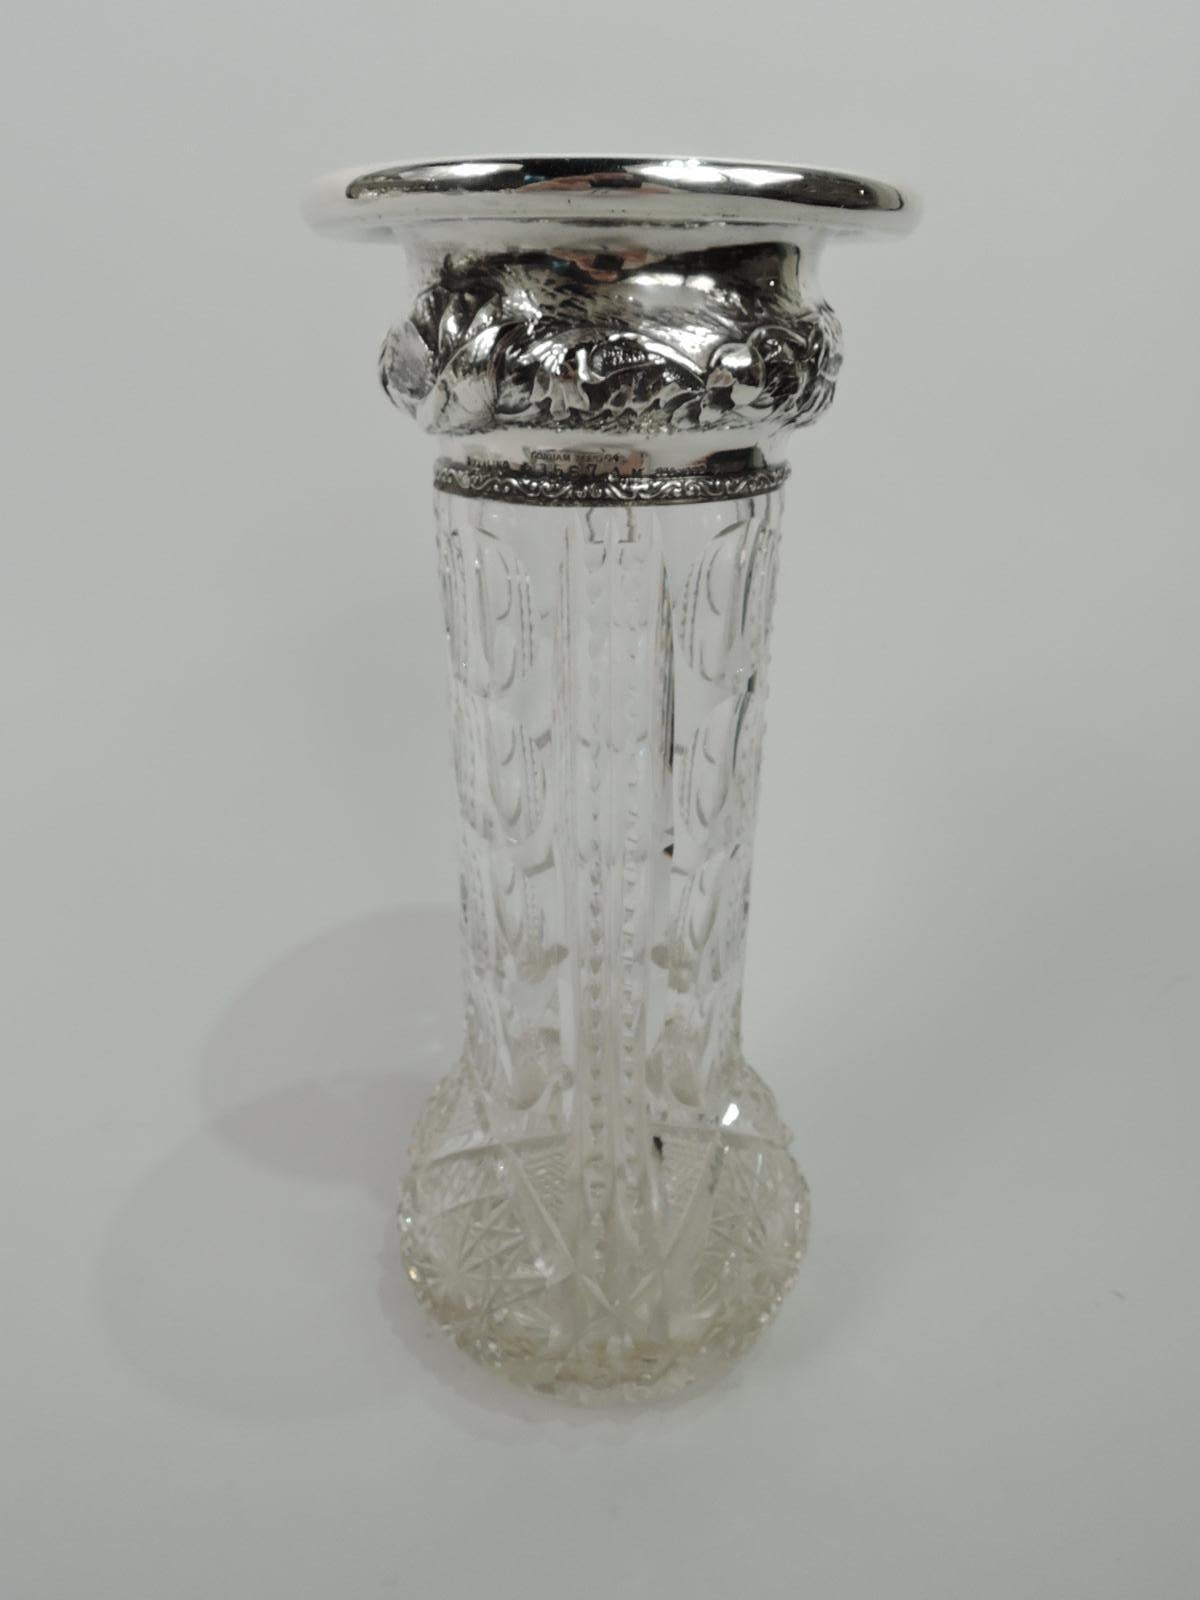 Turn-of-the-century American Art Nouveau brilliant-cut glass vase with sterling silver collar. Cylindrical with vertical ornament comprising two notched flutes between plain ones alternating with 4 circles. Bulbous bottom with stars and diaper.